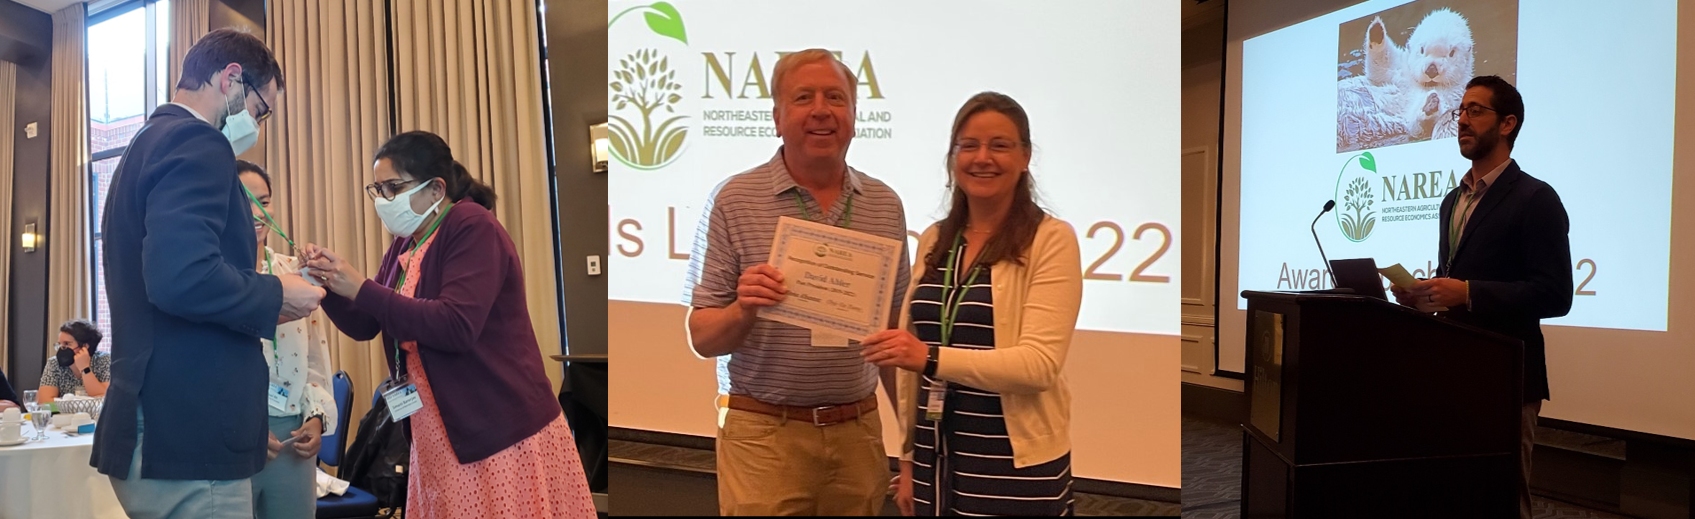 Drs. Noblet and Malacarne at NAREA 2022